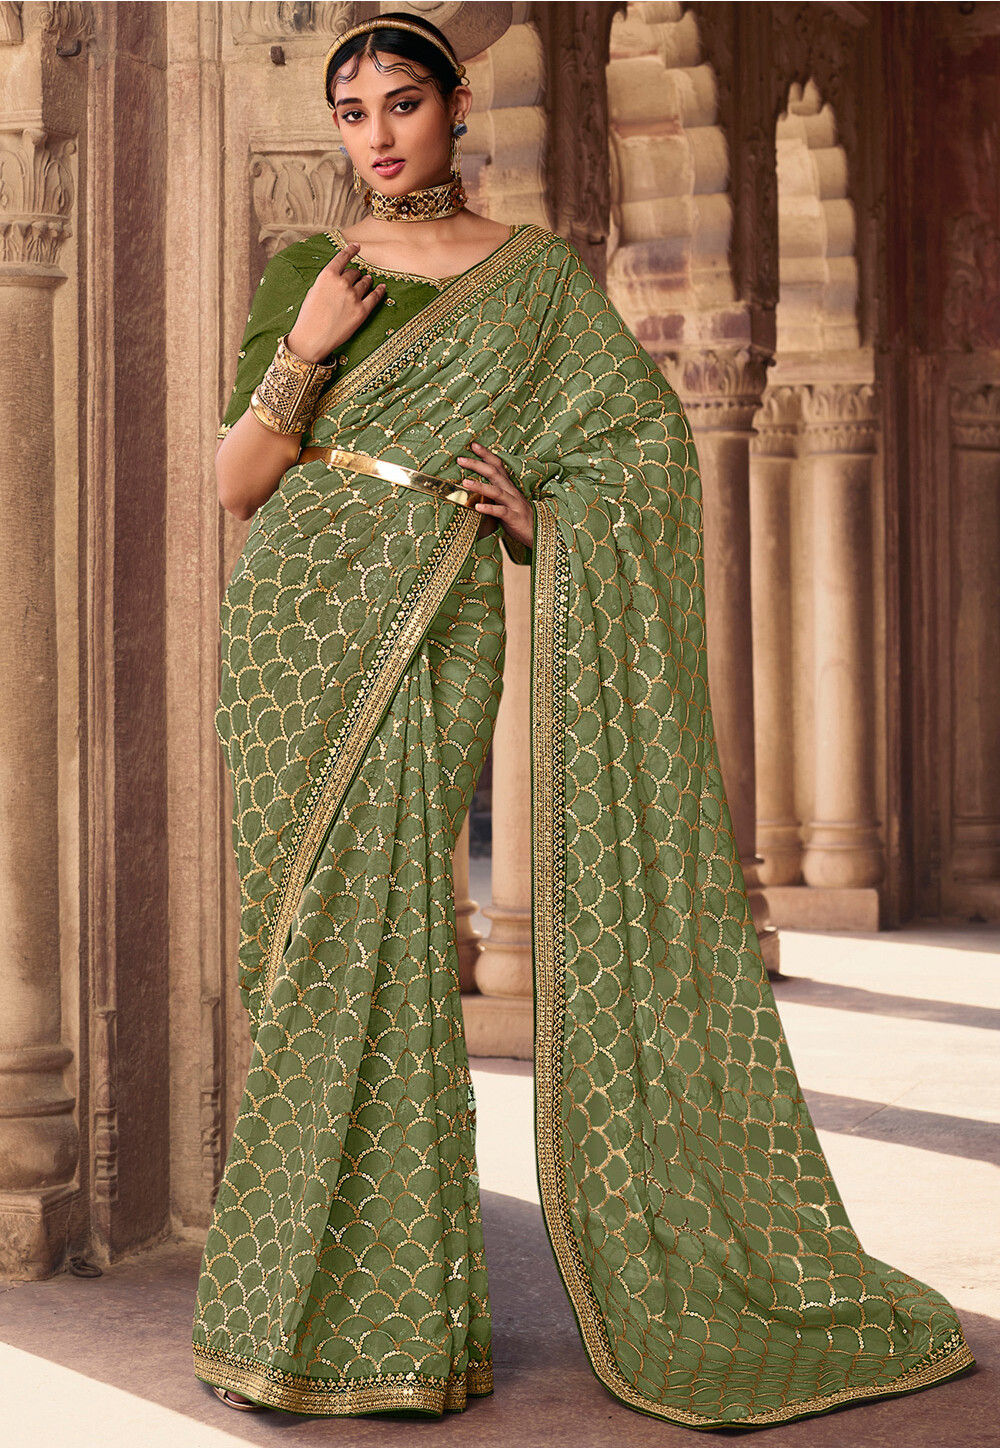 Embroidered Organza Saree in Light Olive Green : SBQ166